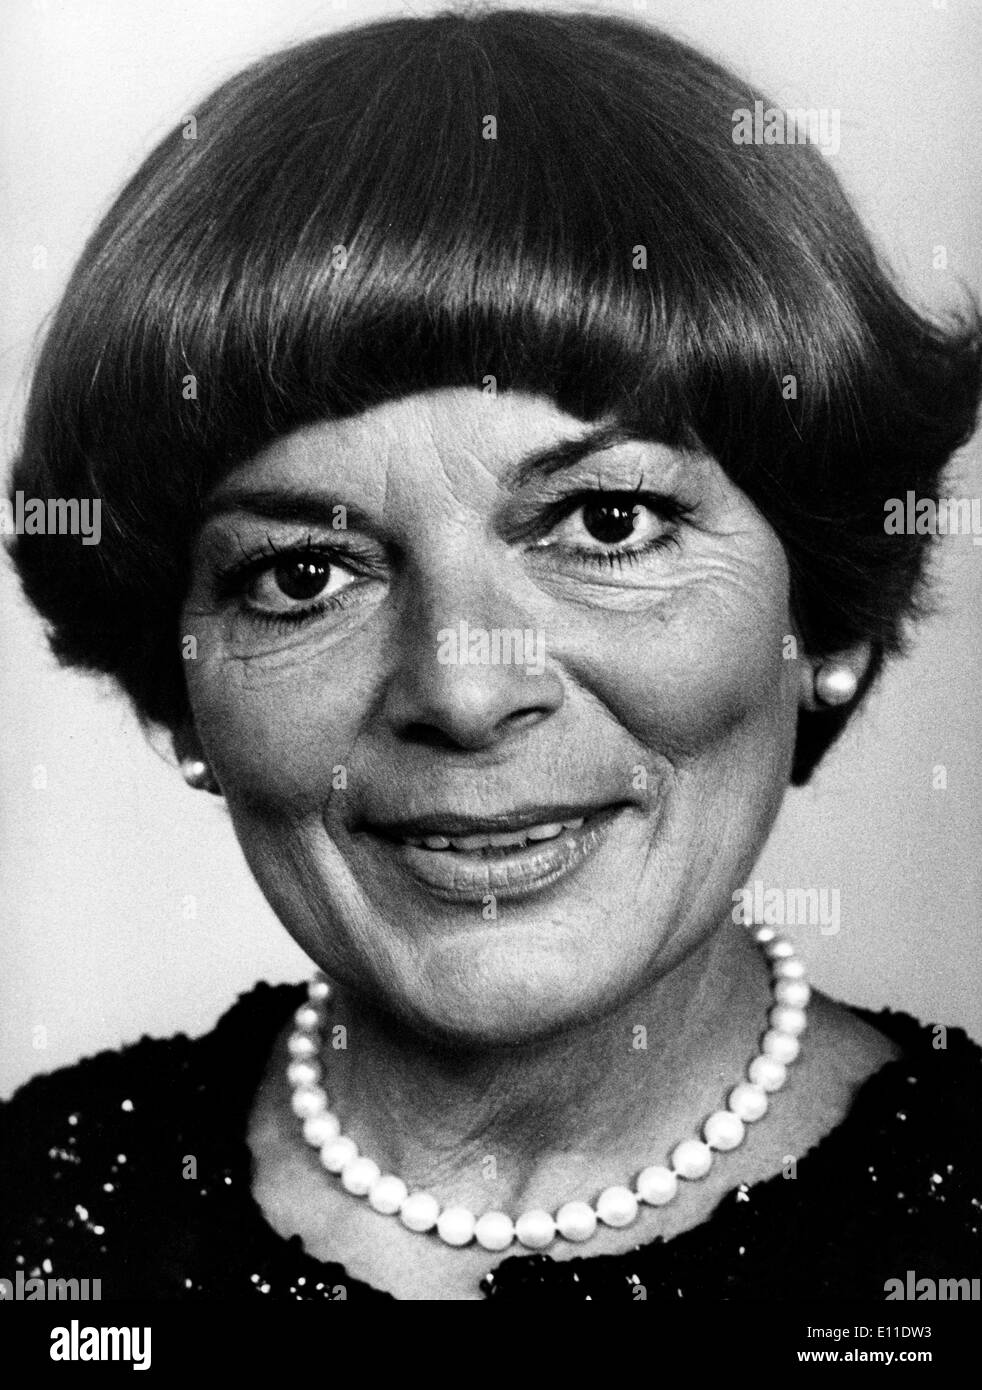 Sep 08, 1977; Zurich, Switzerland; Famous singer LYS ASSIA ('Oh my Daddy') came back to Switzerland for a TV show. Stock Photo